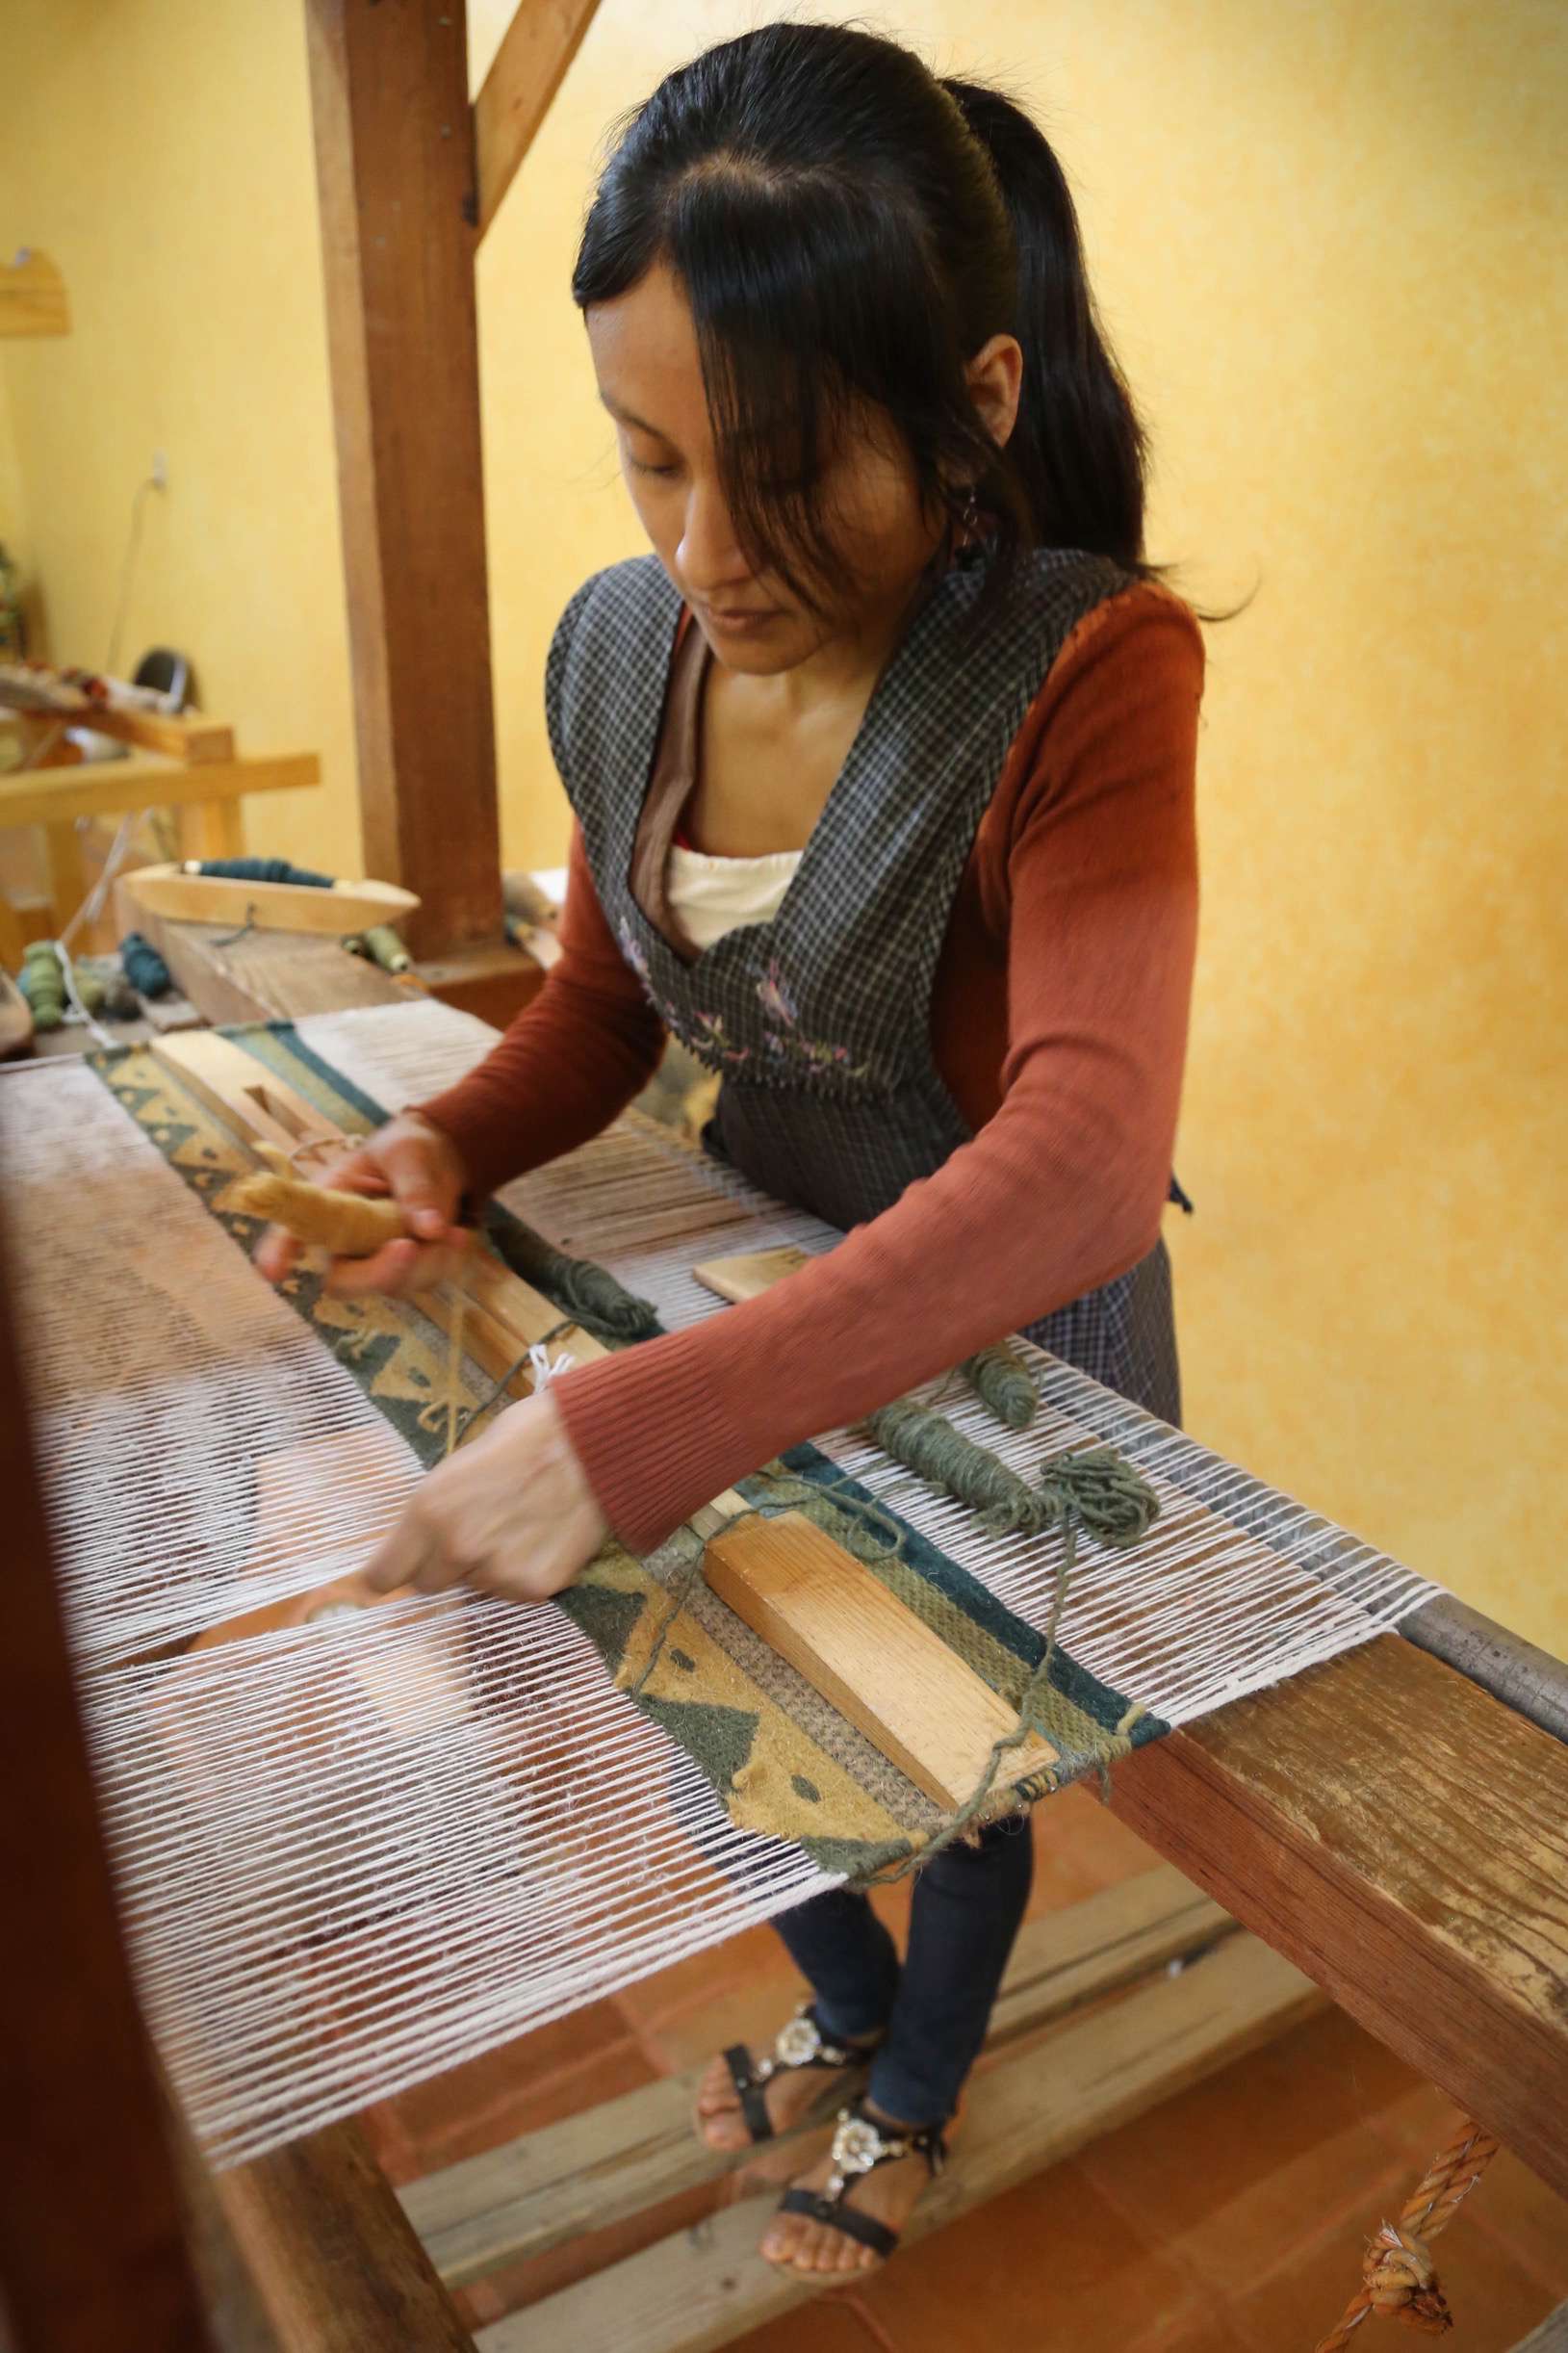 This young woman works on a step loom, carefully following the pattern that has been laid out on the warp.